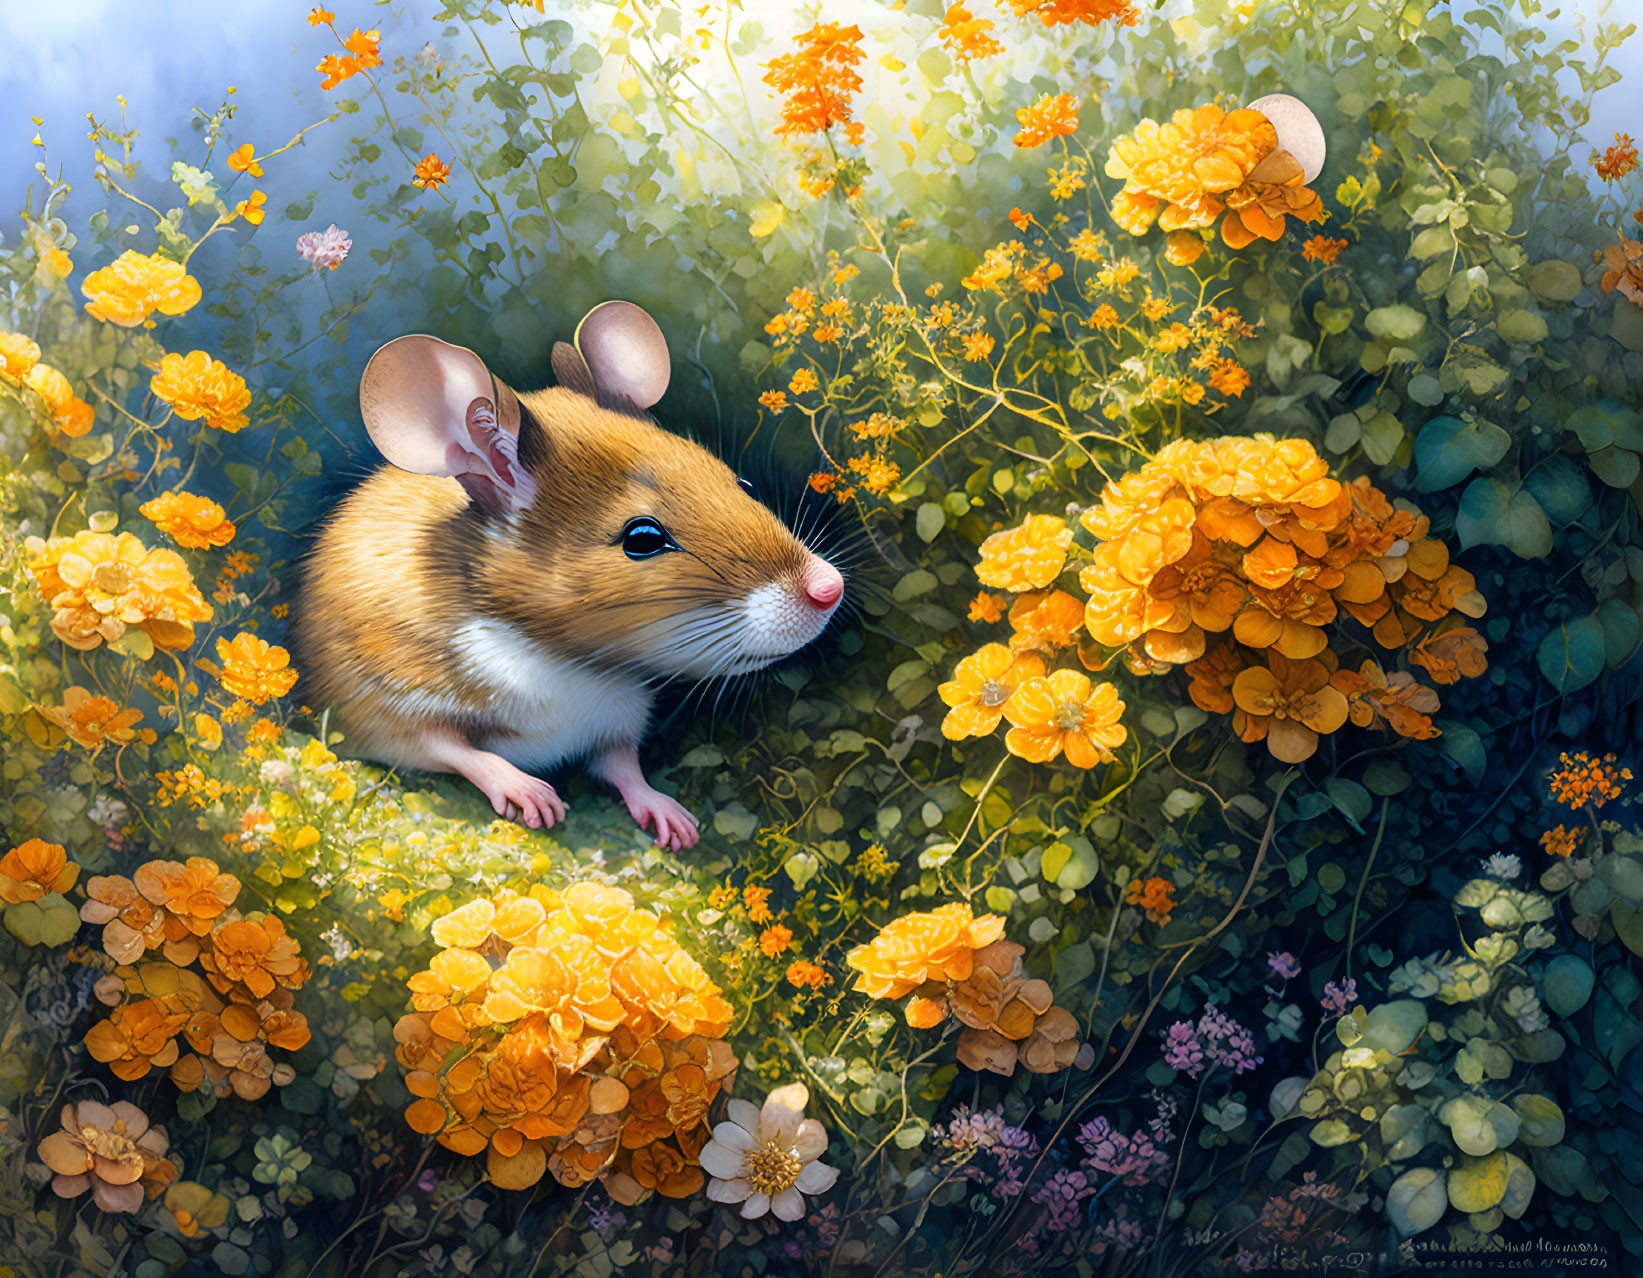 Detailed illustration of a mouse in lush floral scenery with butterflies